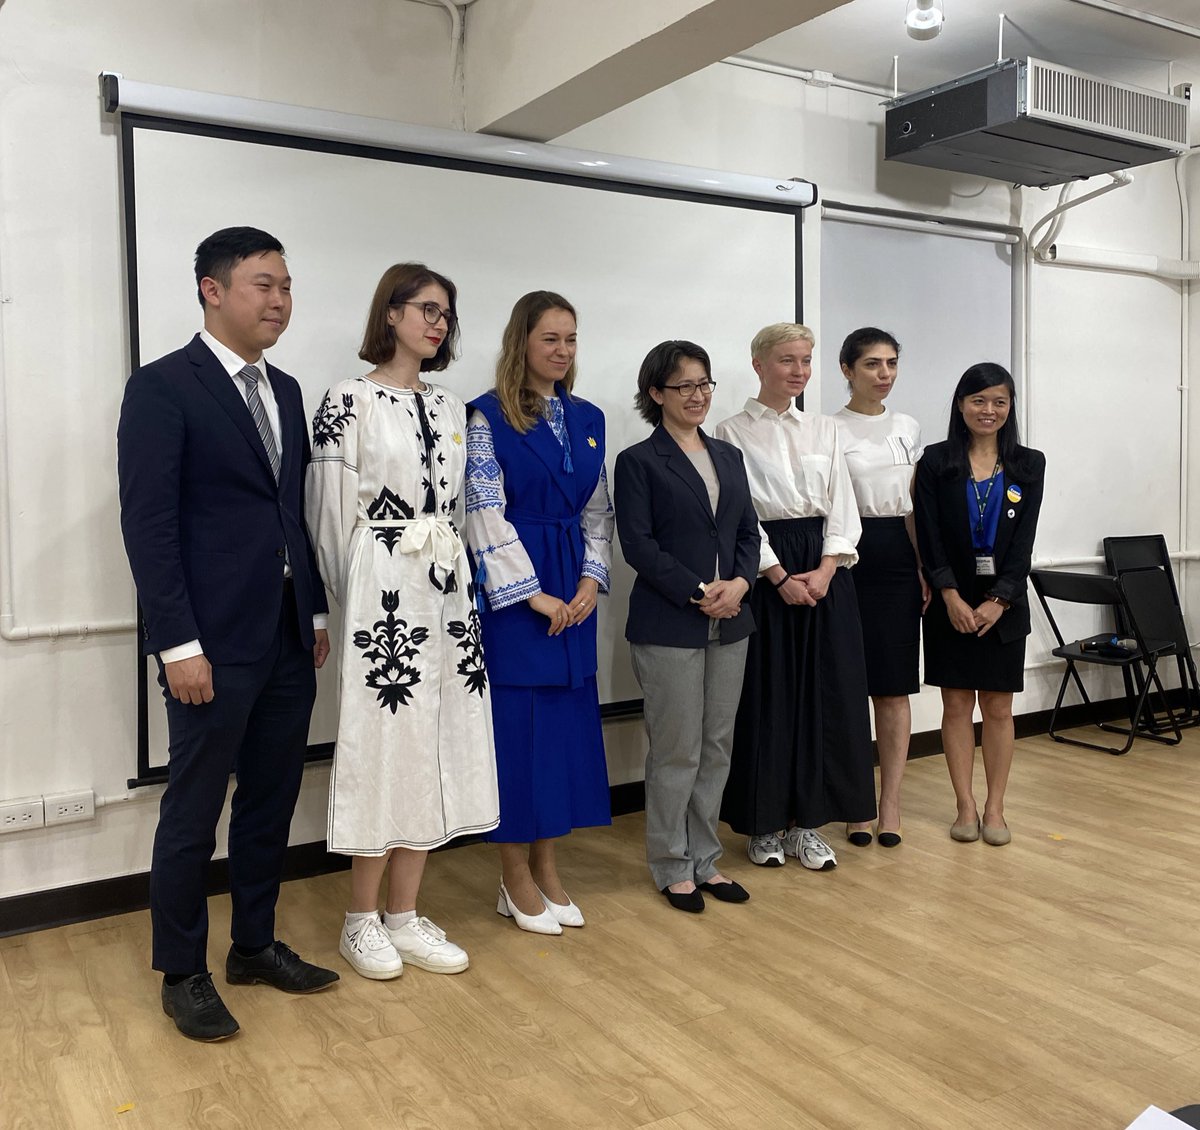 🇺🇦🇹🇼 Another history in making moment. Ukrainian delegates meeting with the Vice President-elect of Taiwan @bikhim at the inaugural edition of @DPPonline’s Island of Resilience seminar, hosted by @wen1949.